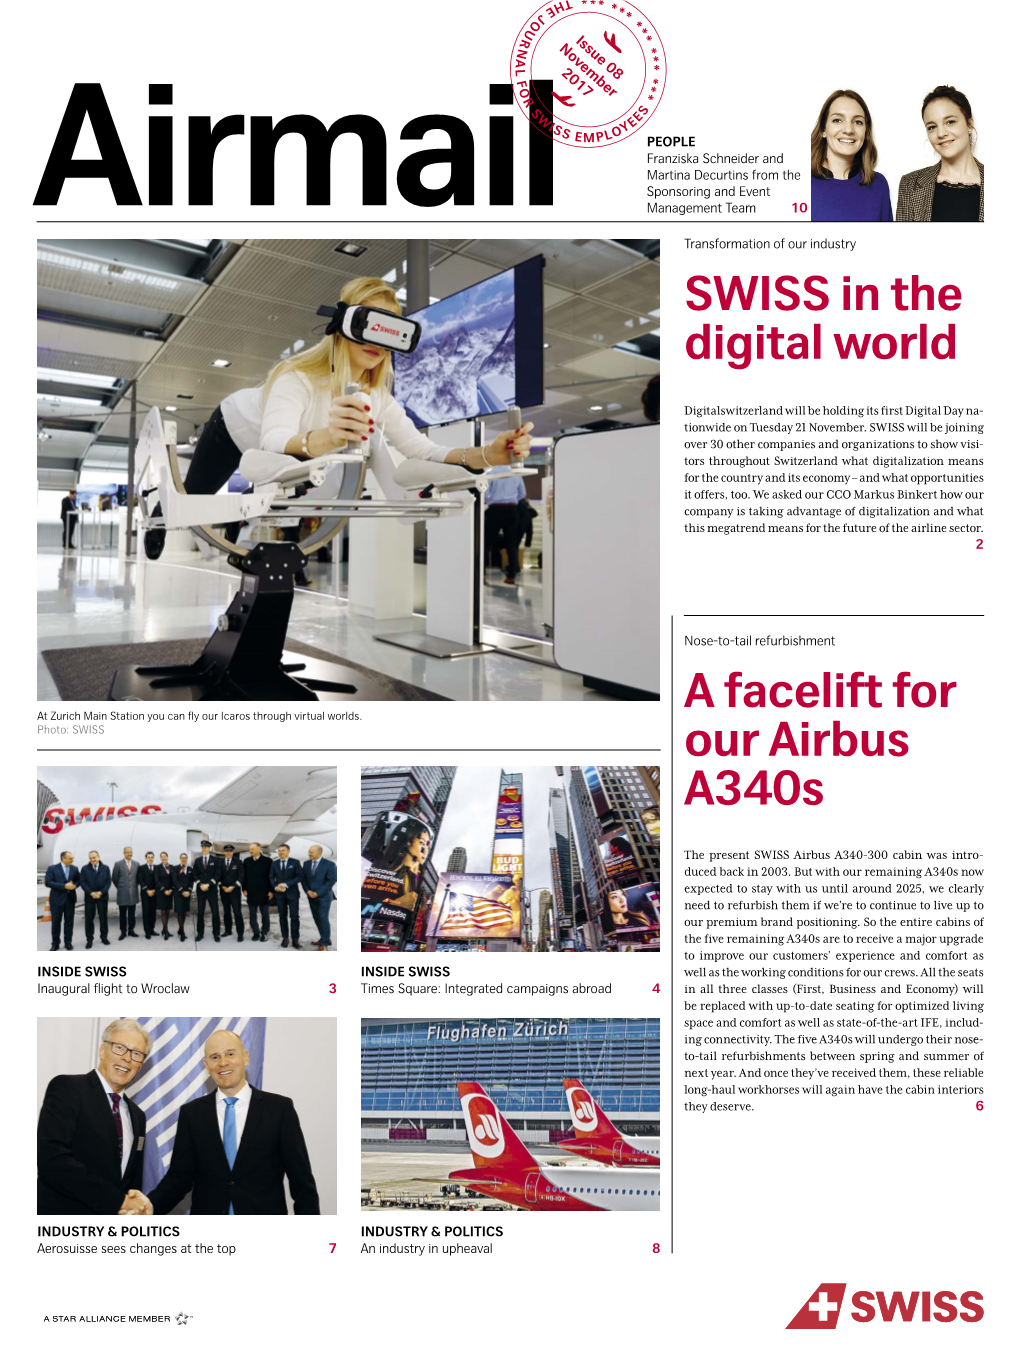 SWISS in the Digital World a Facelift for Our Airbus A340s